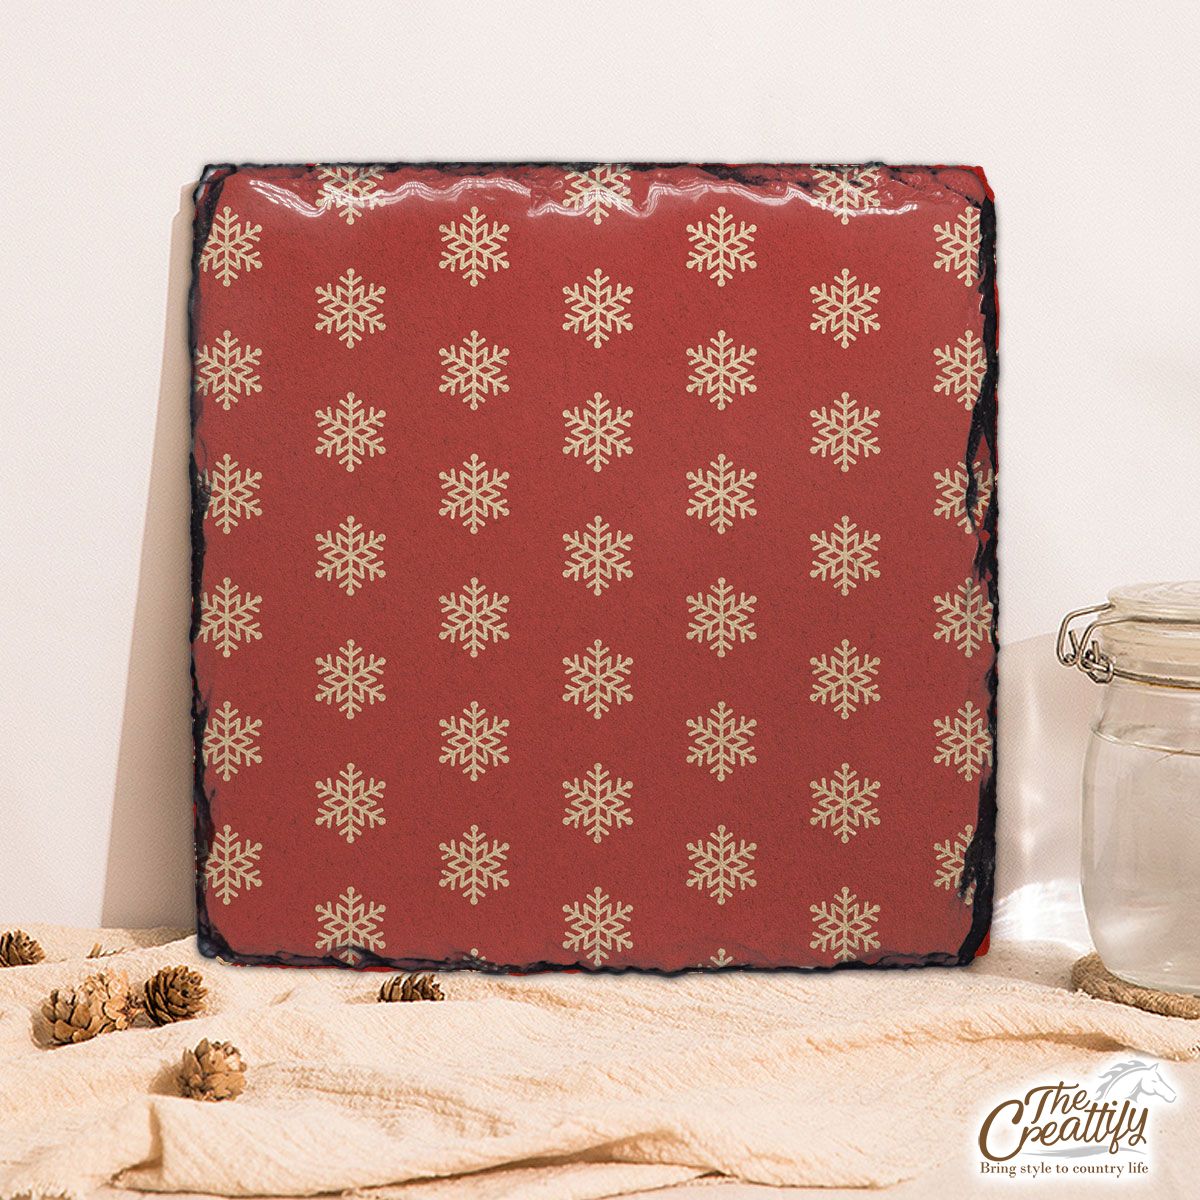 Snowflake Pattern, Christmas Snowflakes, Christmas Present Ideas On Red Background Square Lithograph